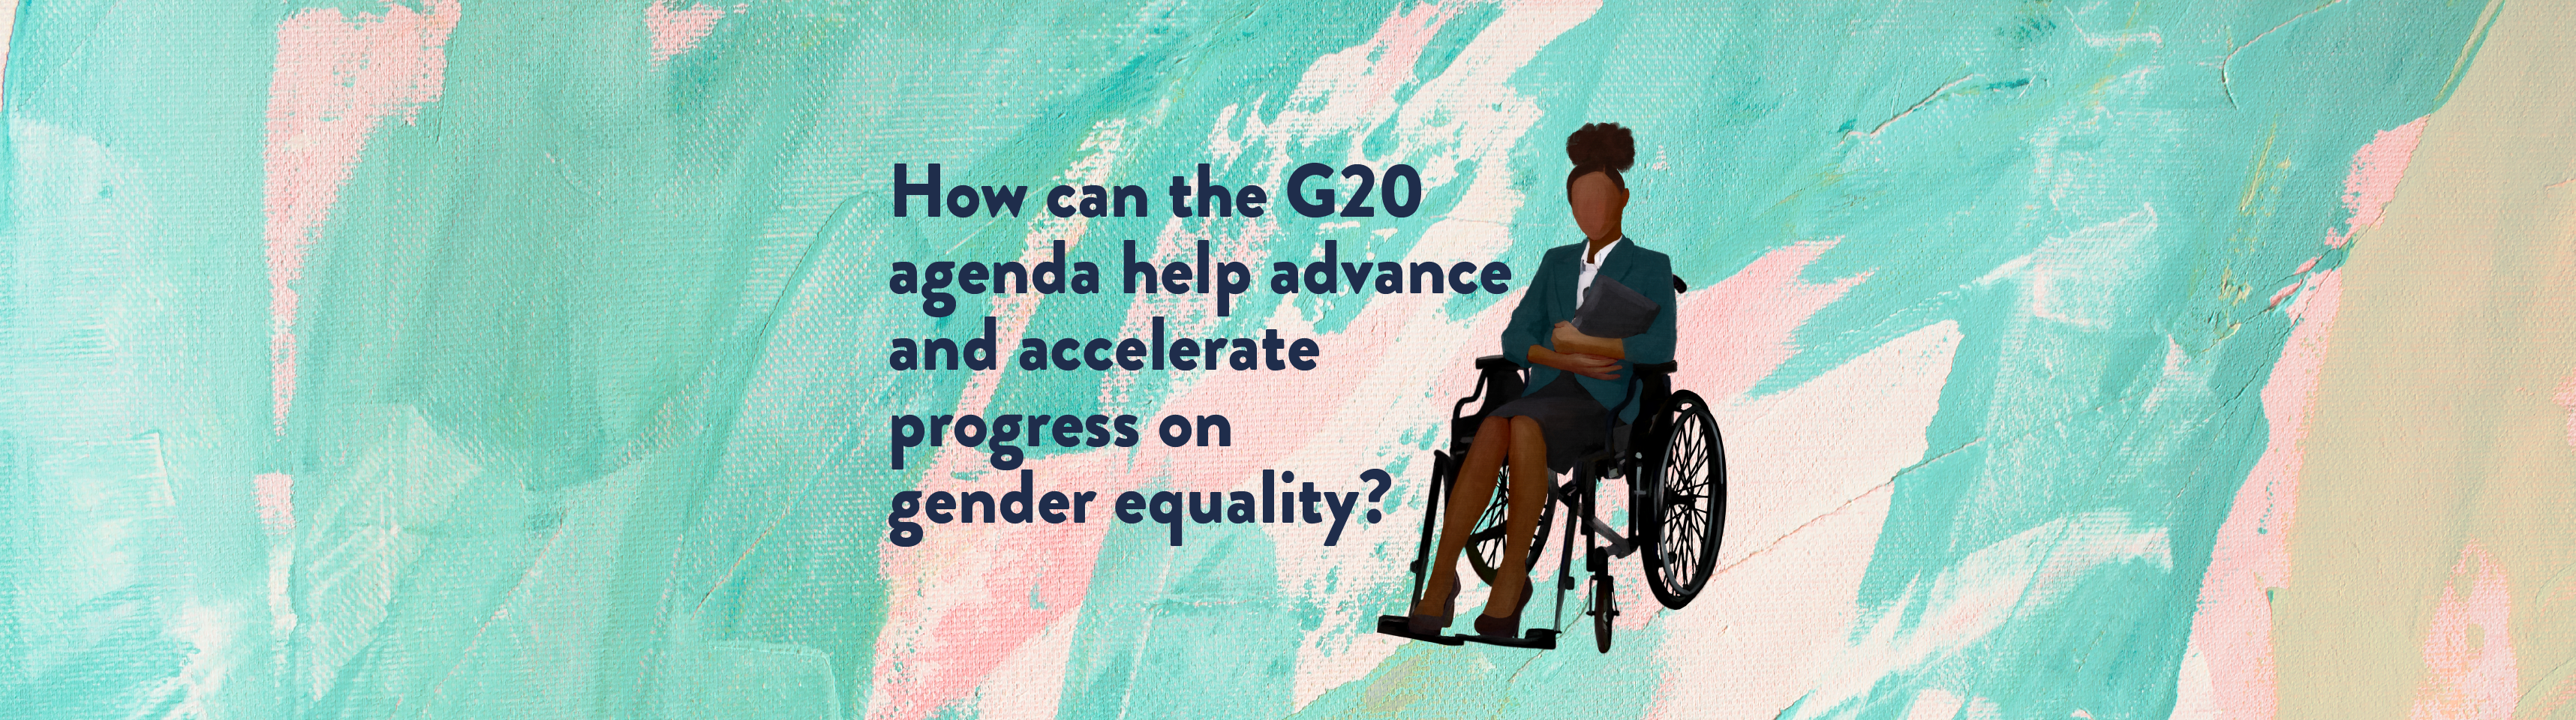 How can the G20 agenda help advance and accelerate progress on gender equality? 